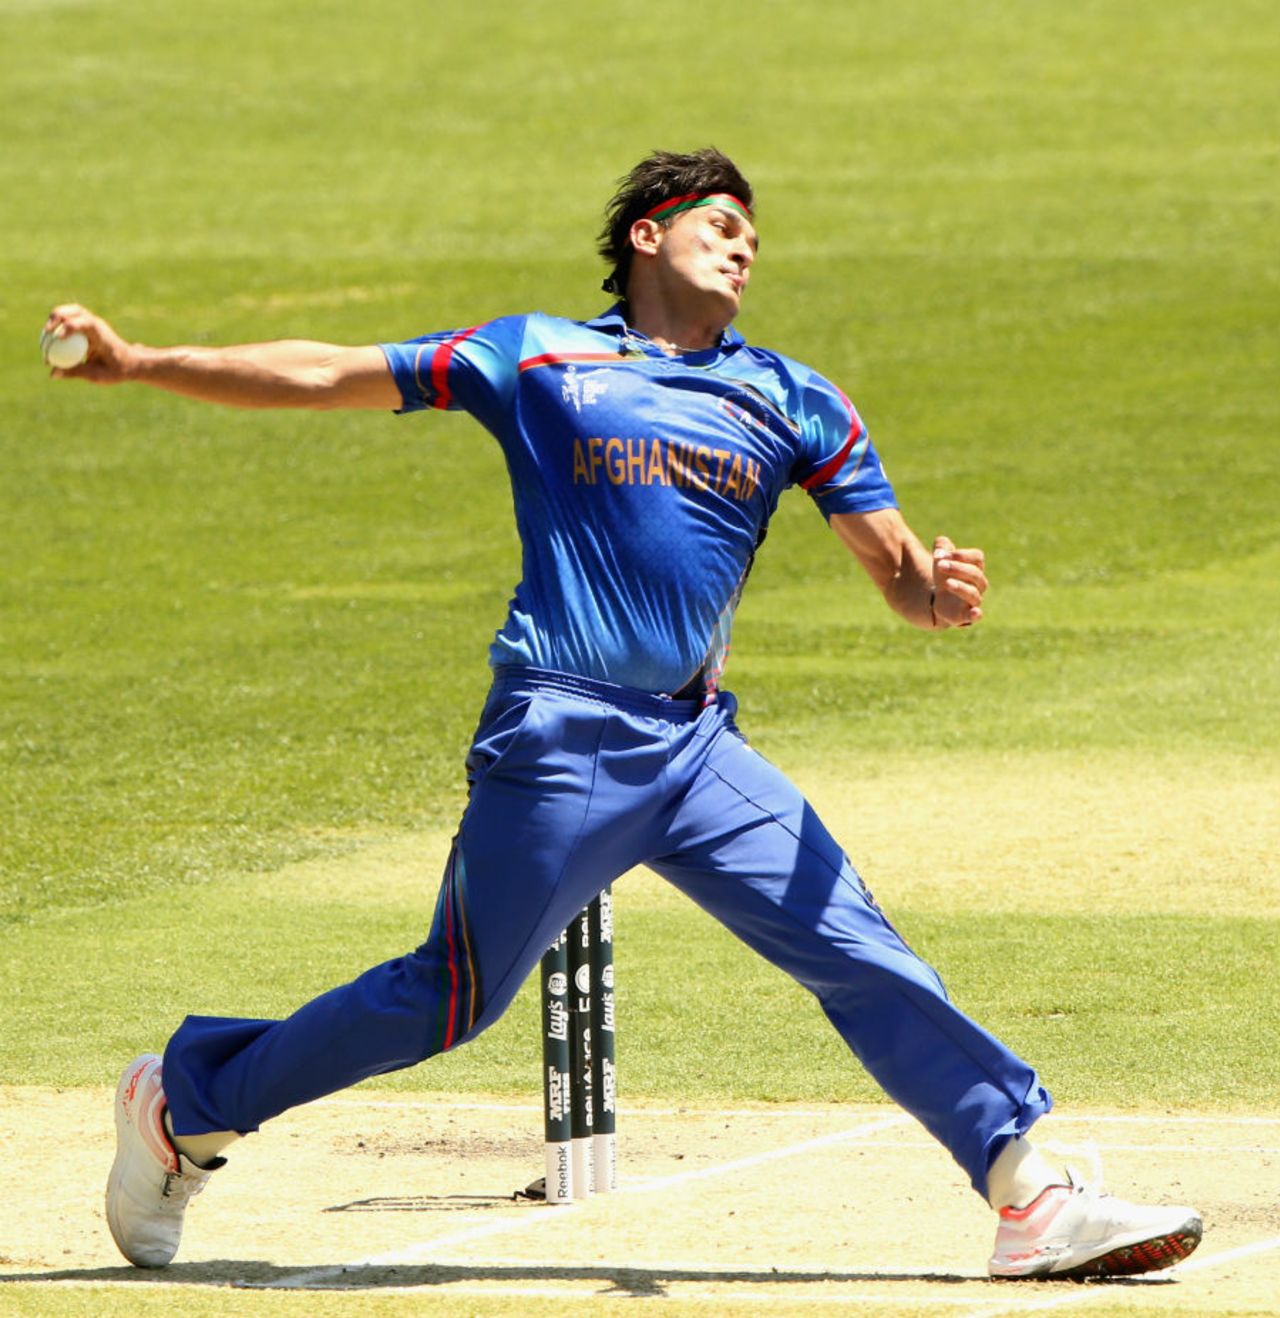 Hamid Hassan worked up good pace and got the wicket of Shikhar Dhawan, Afghanistan v India, World Cup warm-ups, Adelaide, February 10, 2015